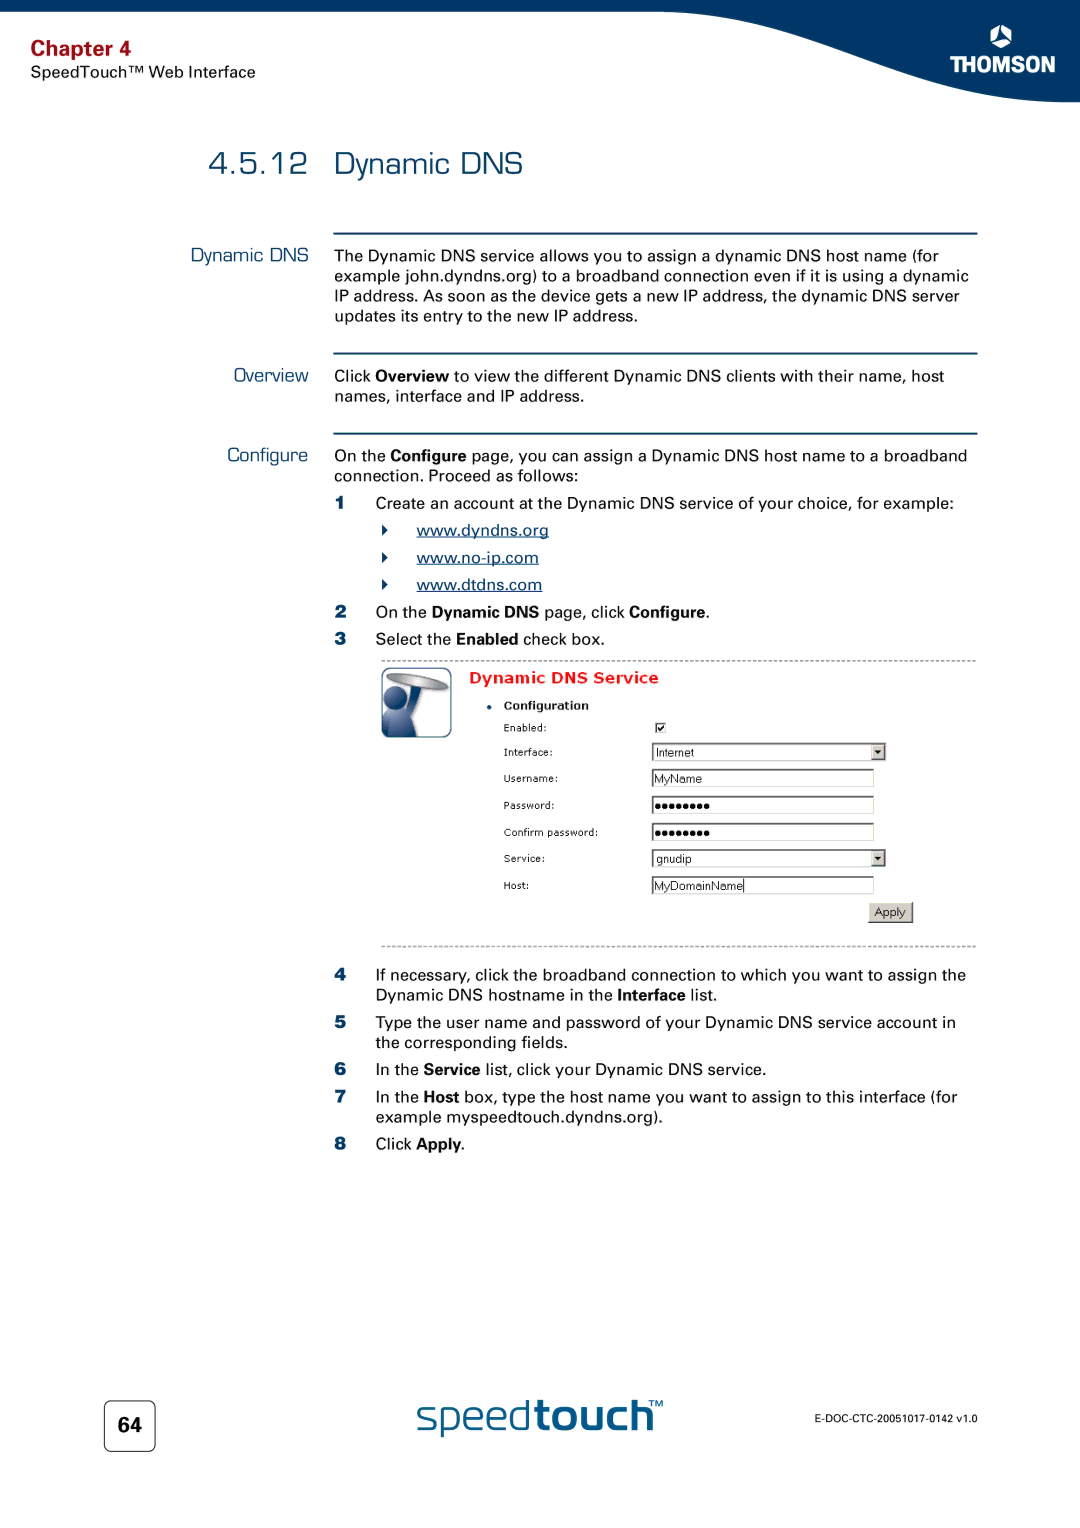 Technicolor - Thomson 536(v6) manual On the Dynamic DNS page, click Configure 